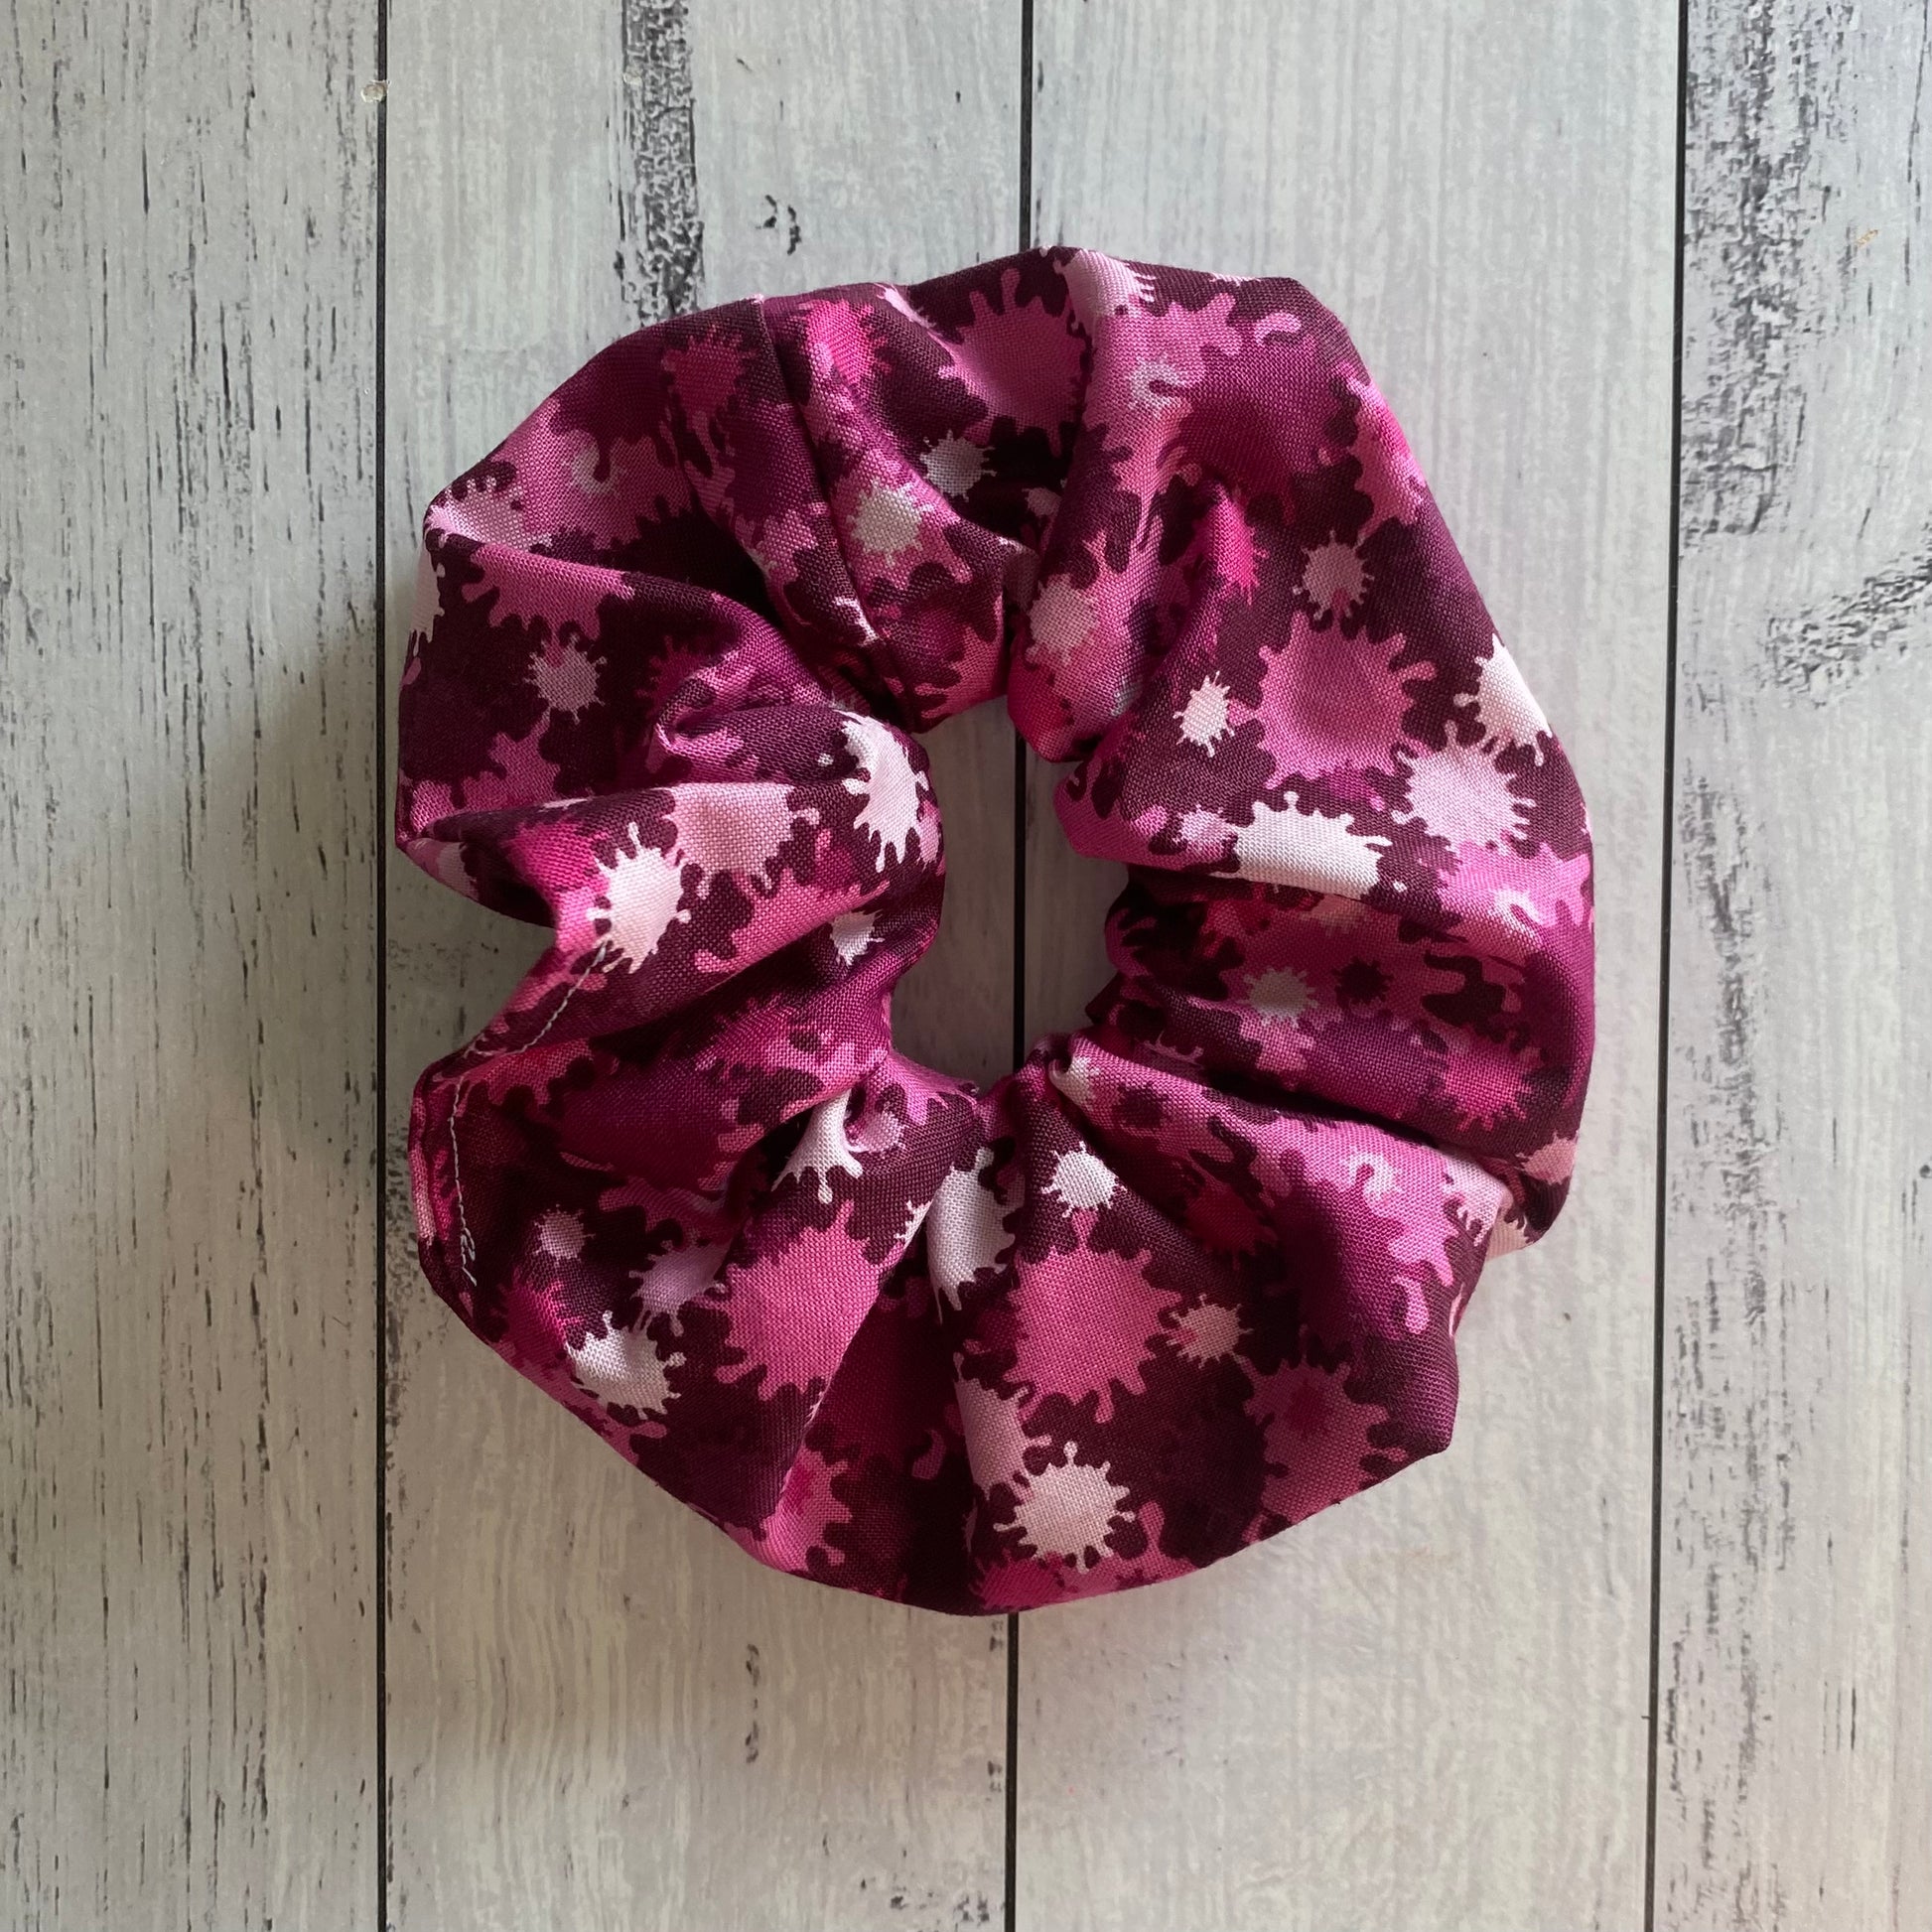 Pinks And white tones creating a fun commando scrunchie. All handmade by zabel designs. 